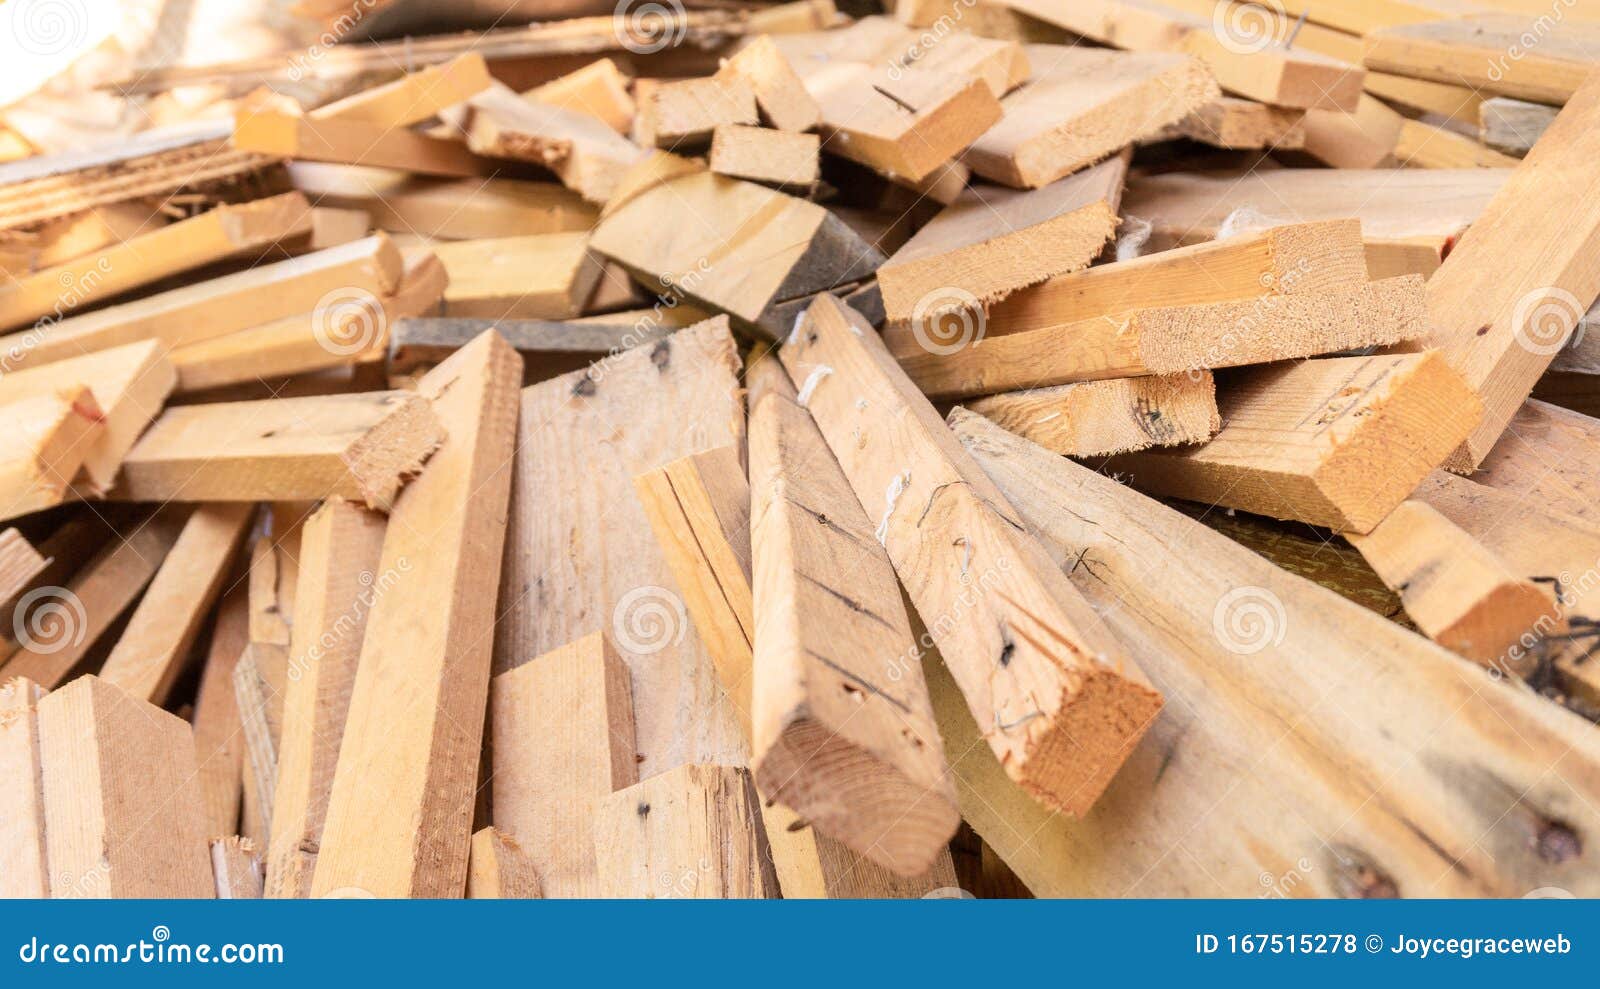 Pile Of Scrap Wood From Mattresses And Palettes For Recycled Up